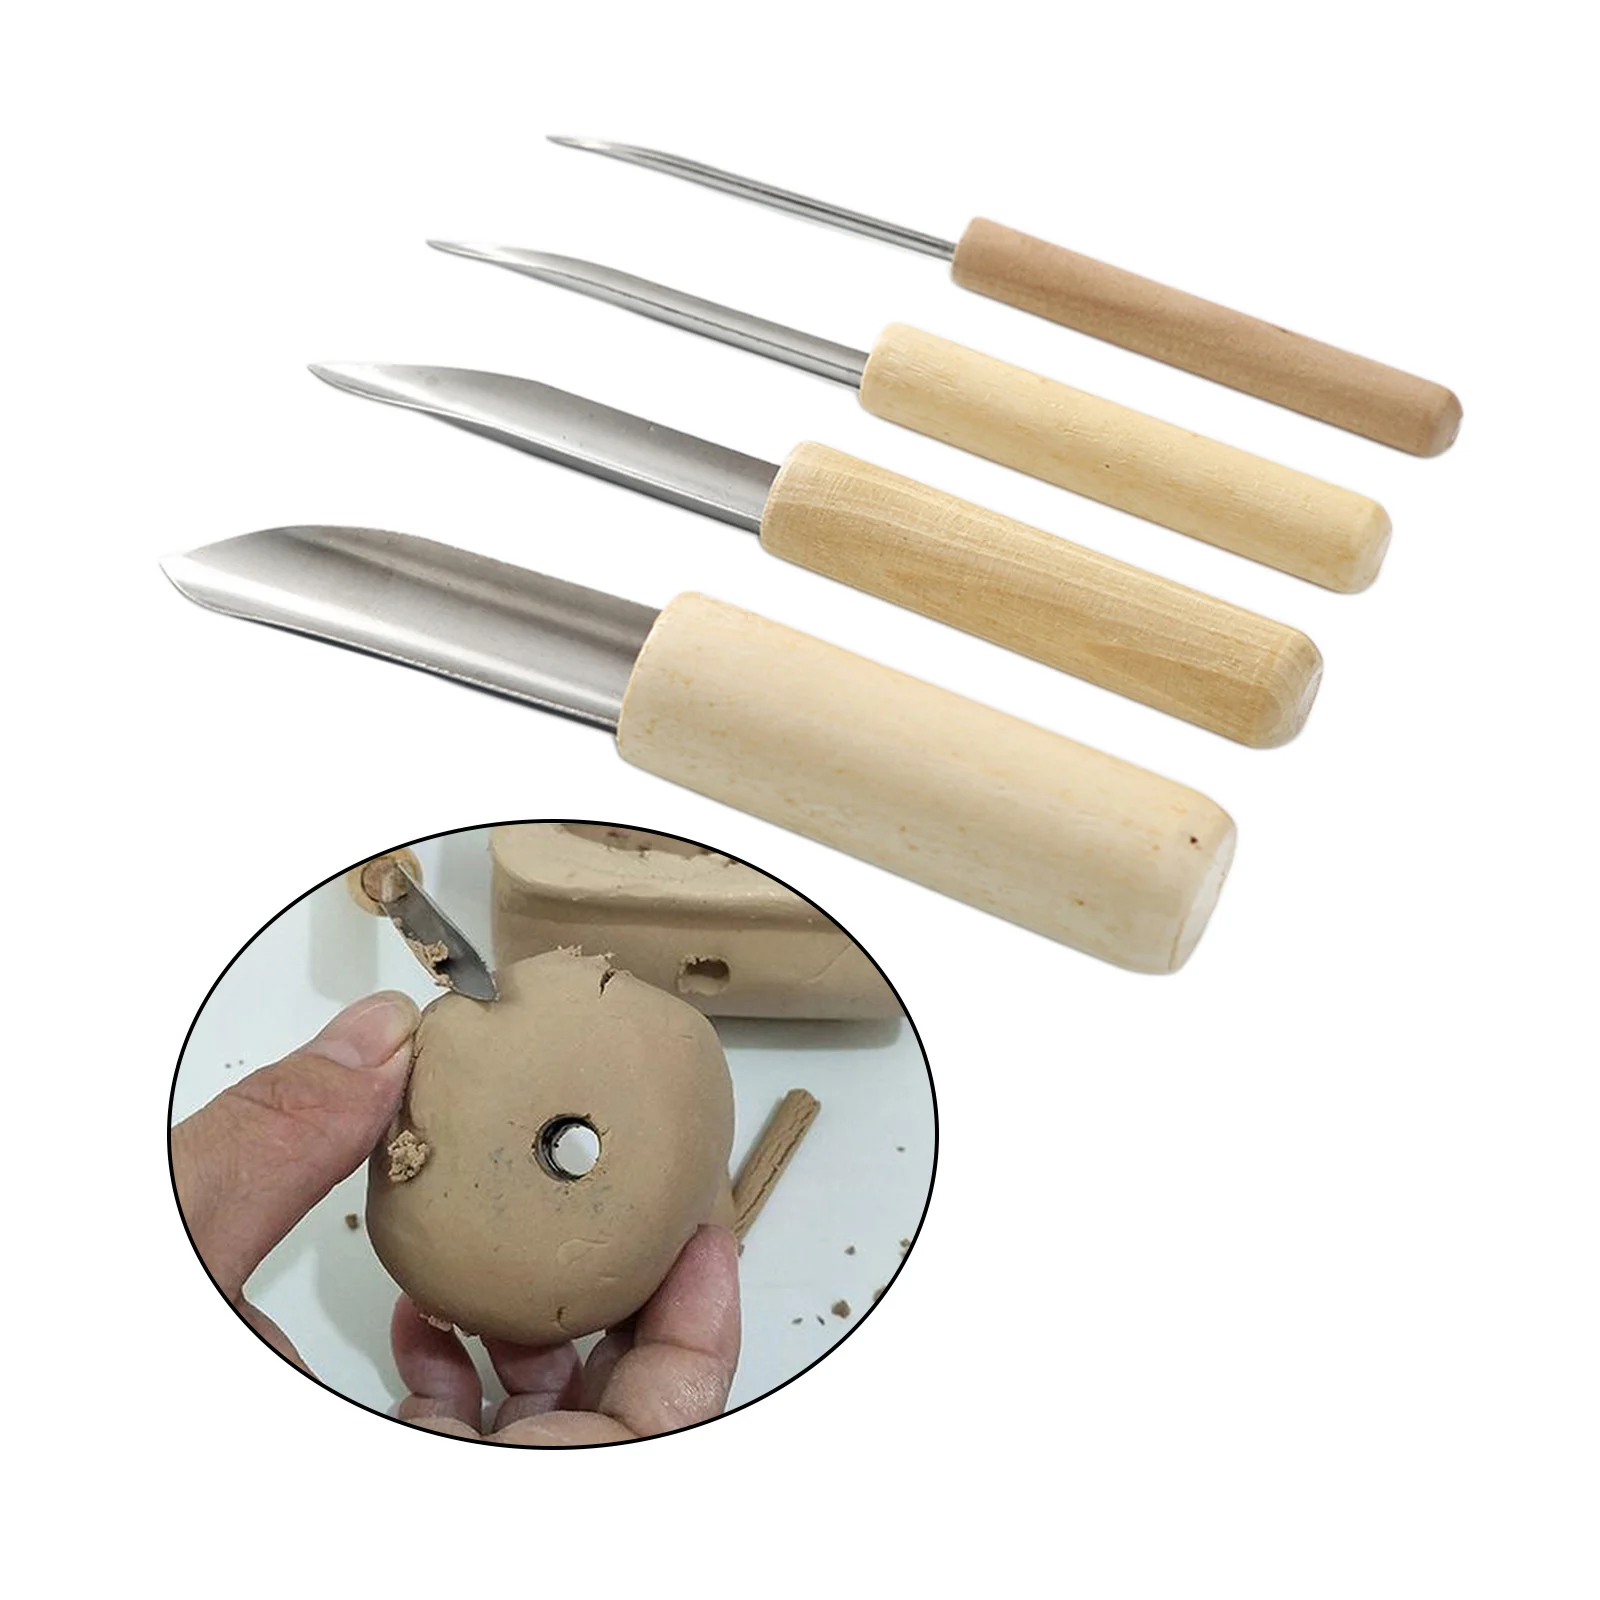 4x Pro Clay Hole Cutters Punch Circle Pottery Clay Sculpture Wooden Drawing Polymer Marking Drilling Student Ceramic Tool